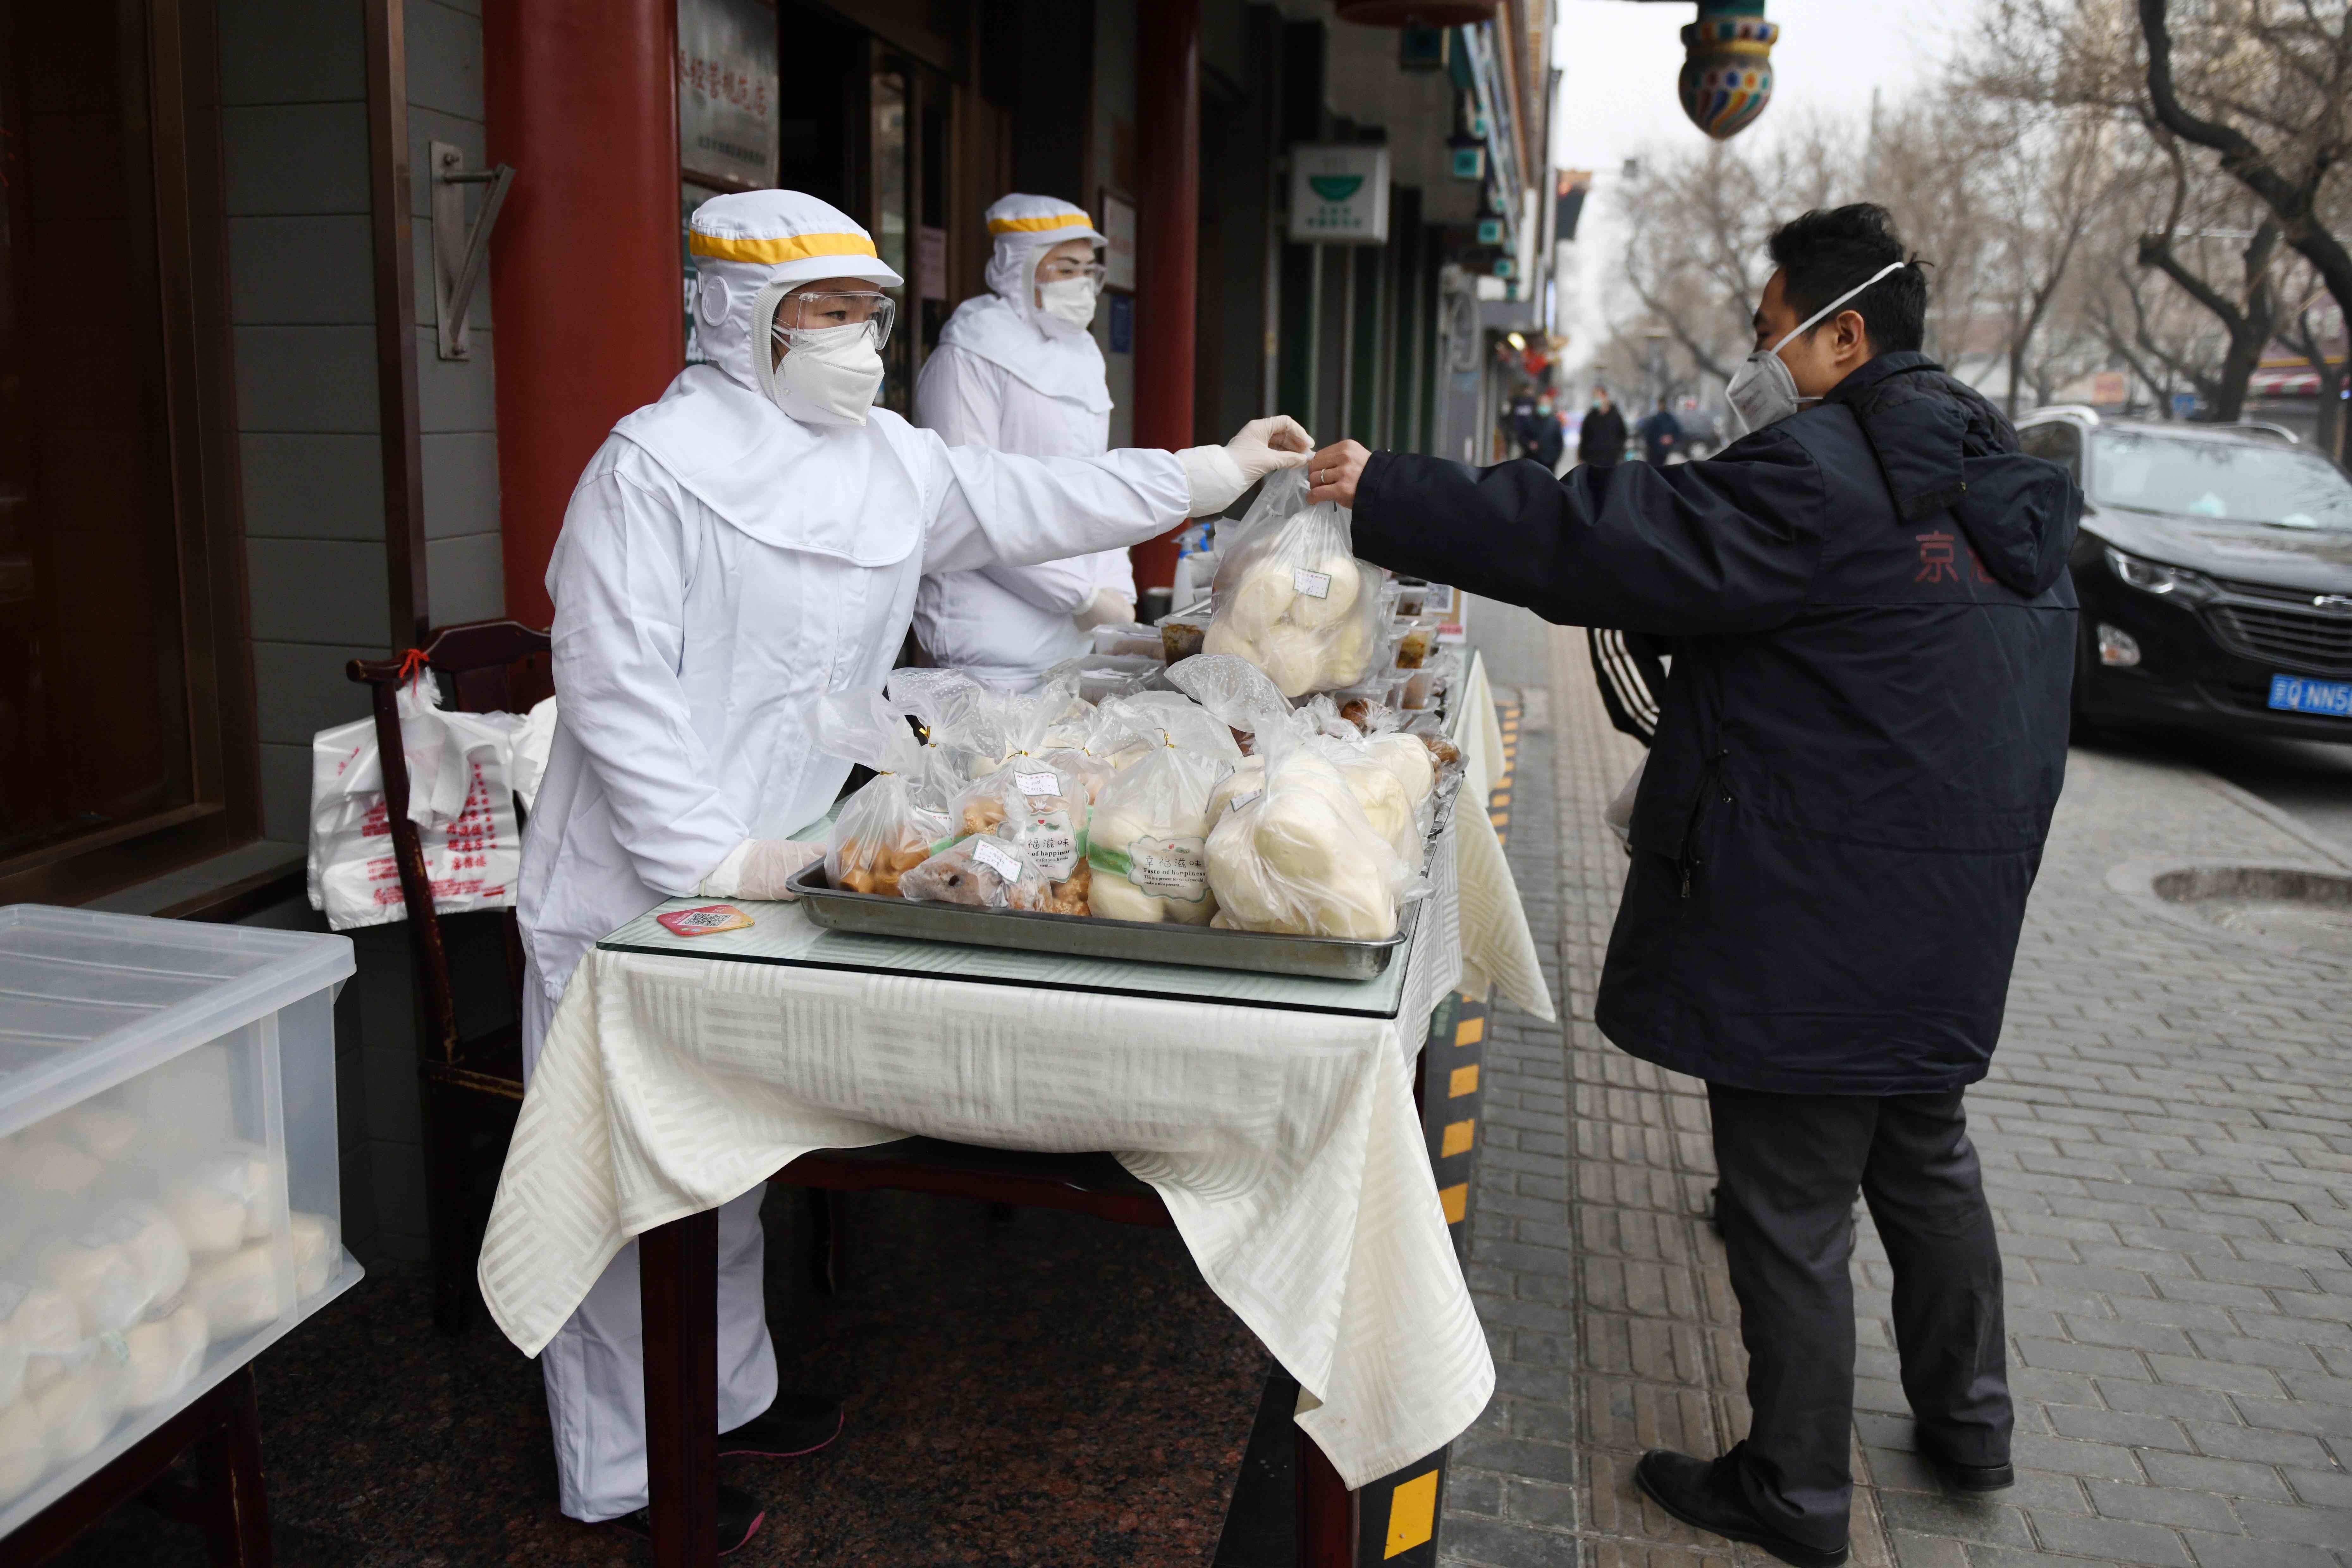 A worker in protective clothing passes a bag of food to a customer on the street outside a restaurant in Beijing. Photo: AFP